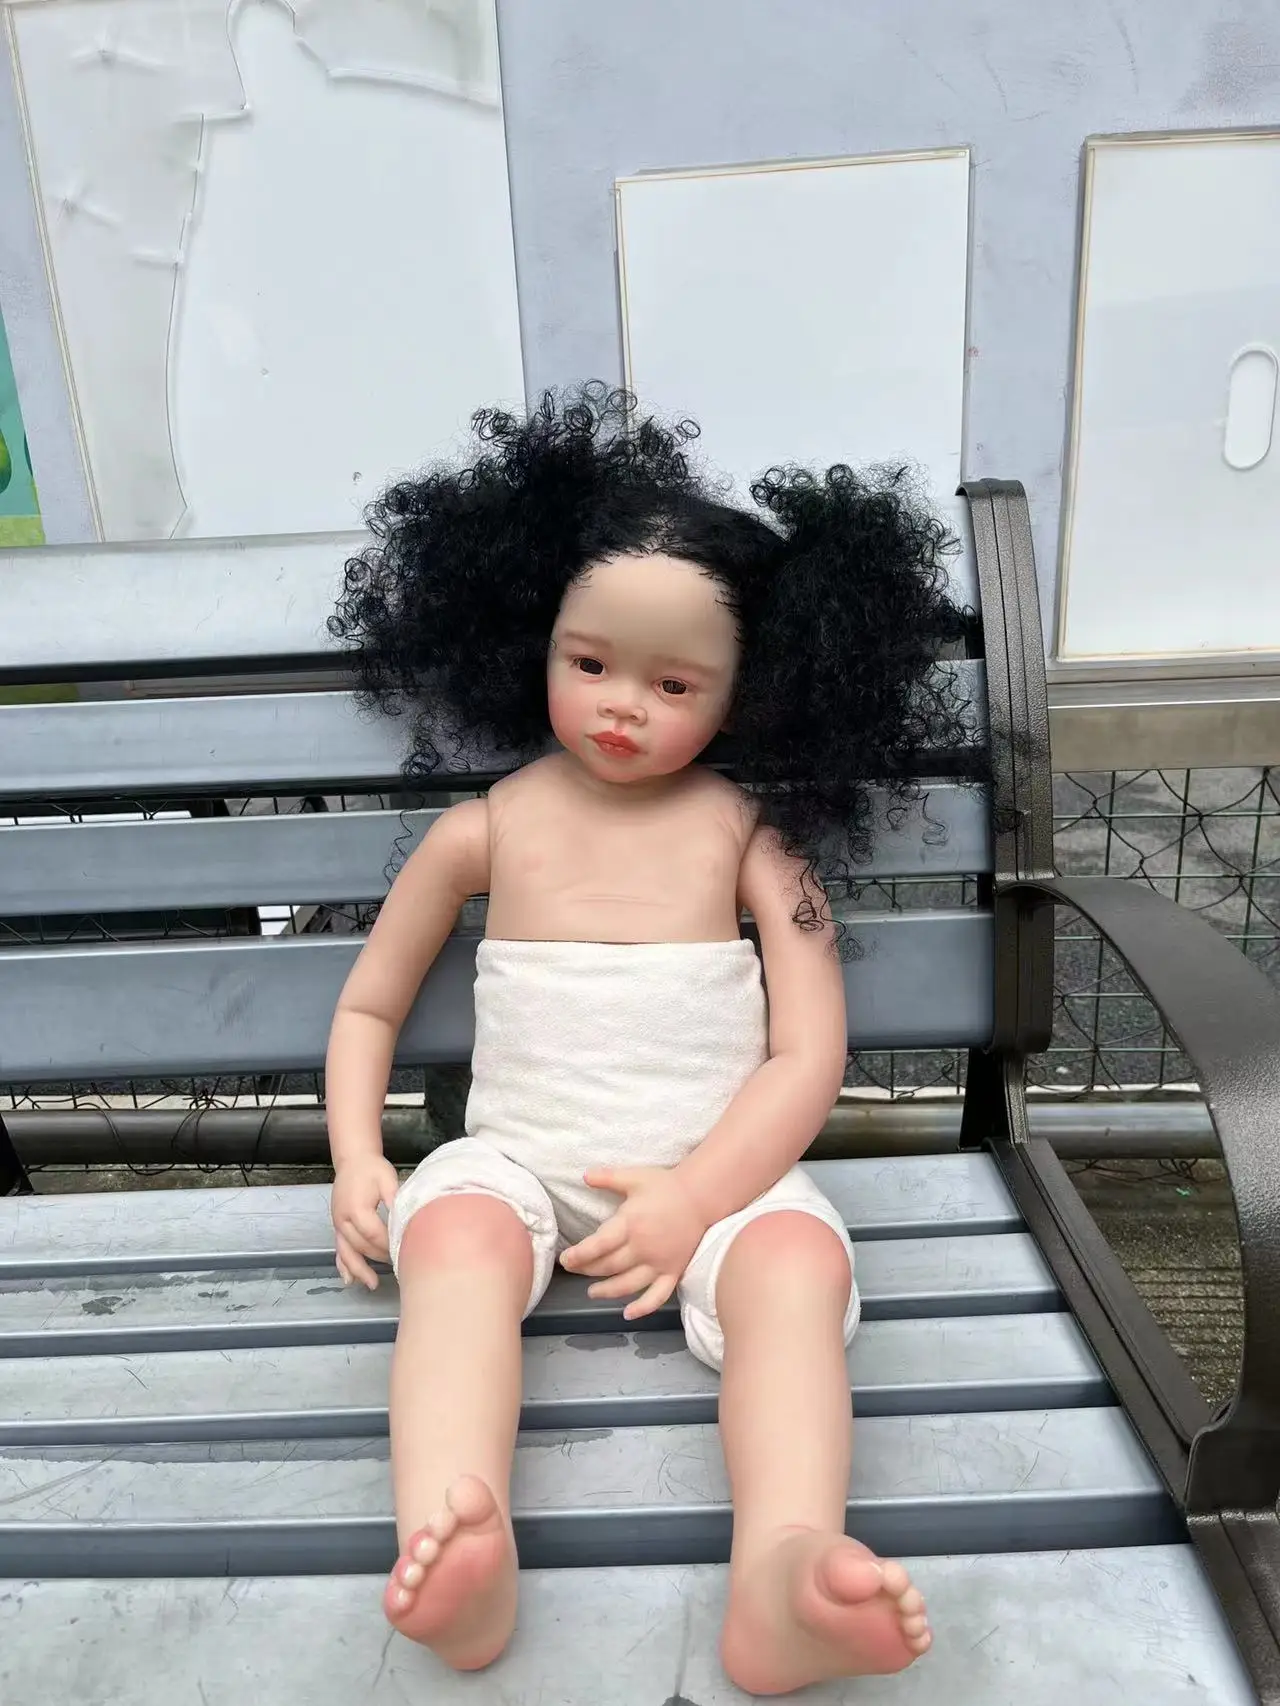 FBBD Customzied Limited Supply 32inch Reborn Baby Doll Meili With Curly Black Hair Reak Photos DIY Part Painted Kits 80cm 32inch photography light reflector 5 in 1 translucent silver gold white black collapsible multi disc